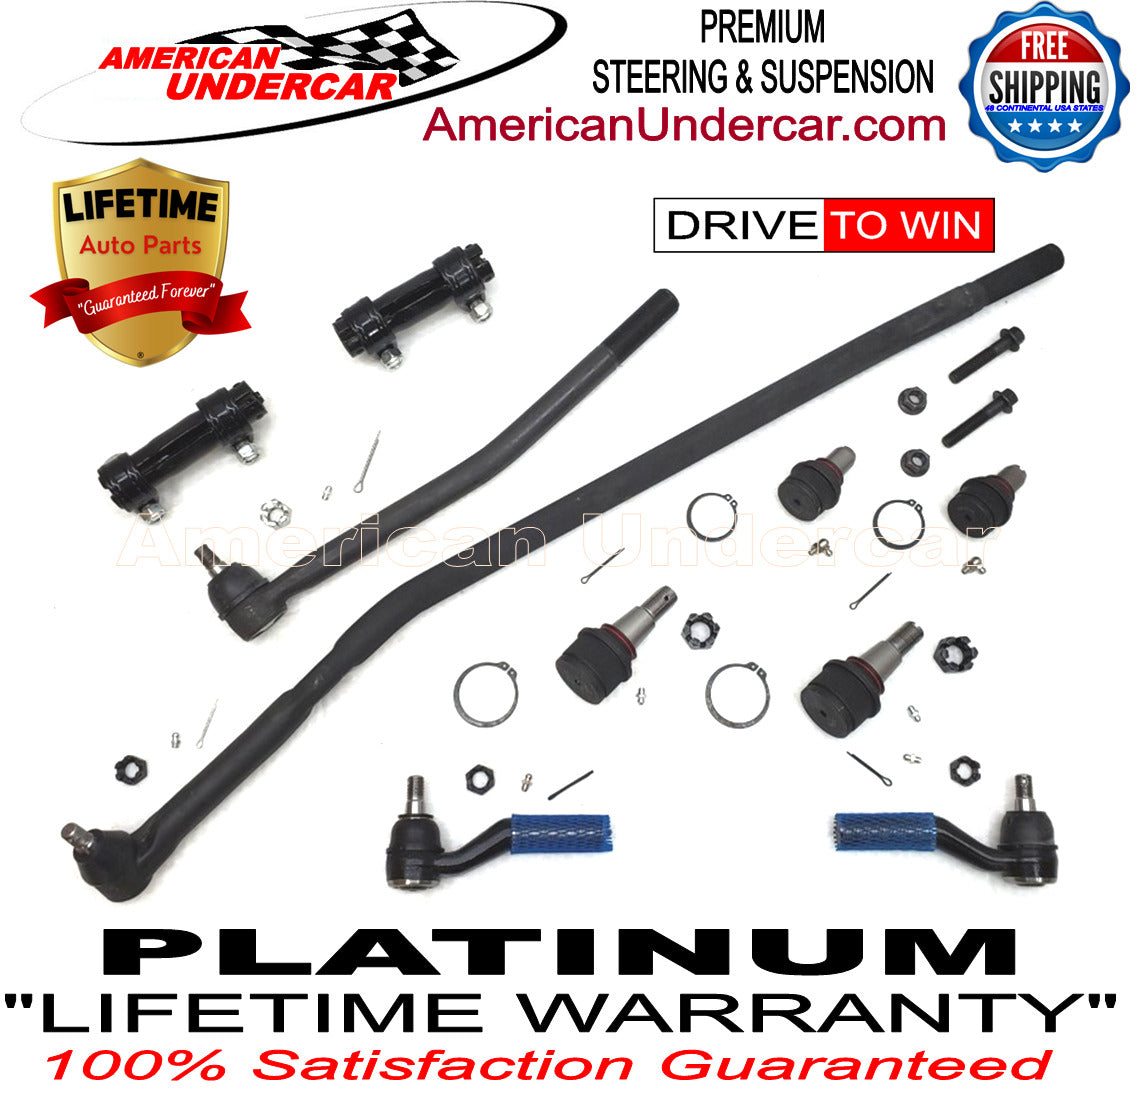 Lifetime Ball Joints Drag Link Tie Rod Ends Steering Kit for 1992-2006 Ford E150 2WD